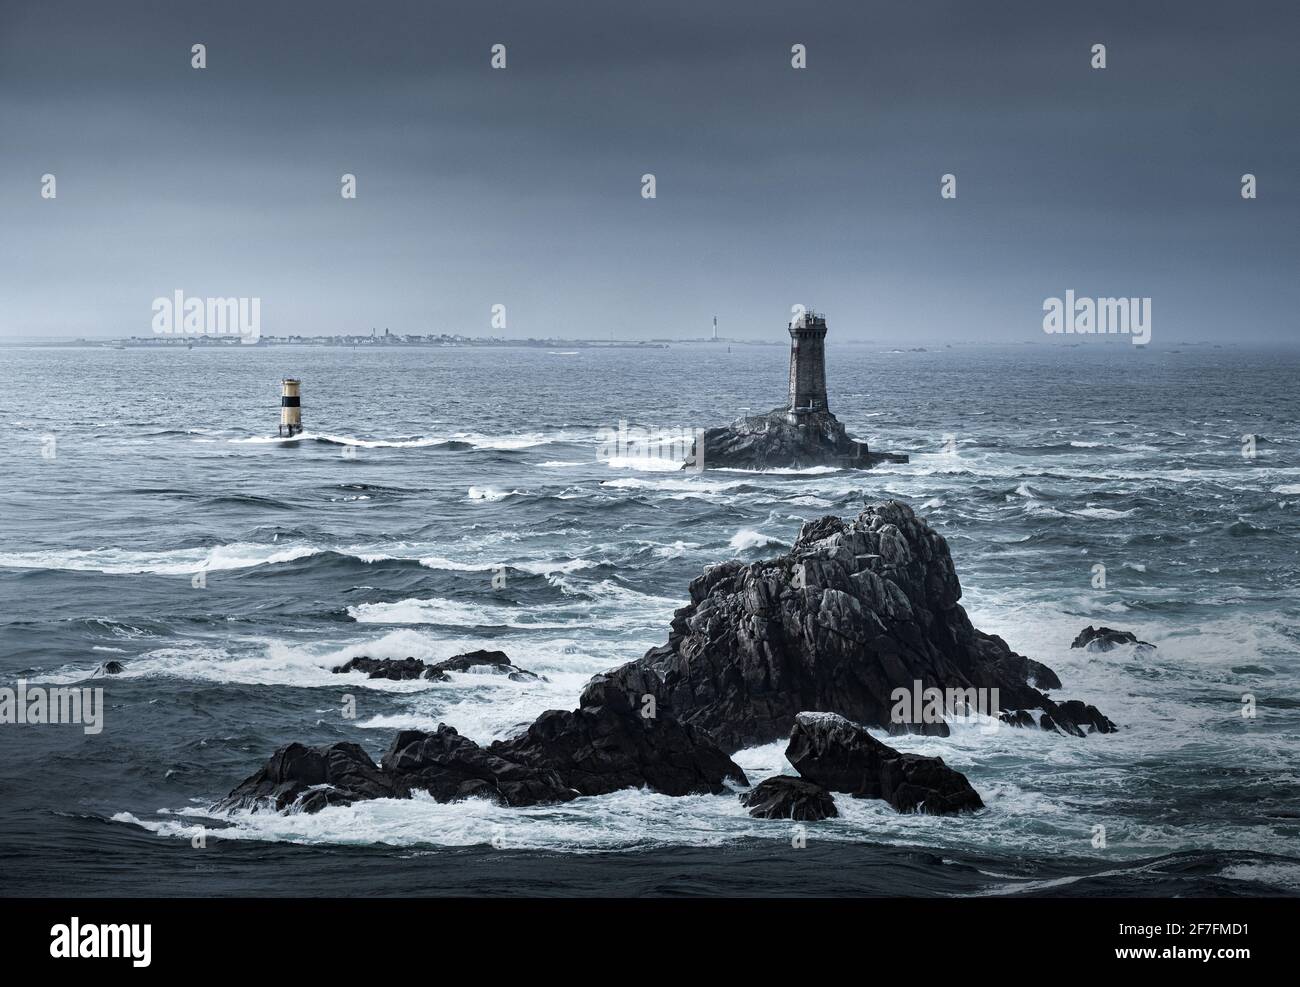 View of the ocean at Pointe du Raz with two lighthouses, Phare de la Vieille and Tourelle de la Plate (Petite Vieille), in the sea and rocks, France Stock Photo